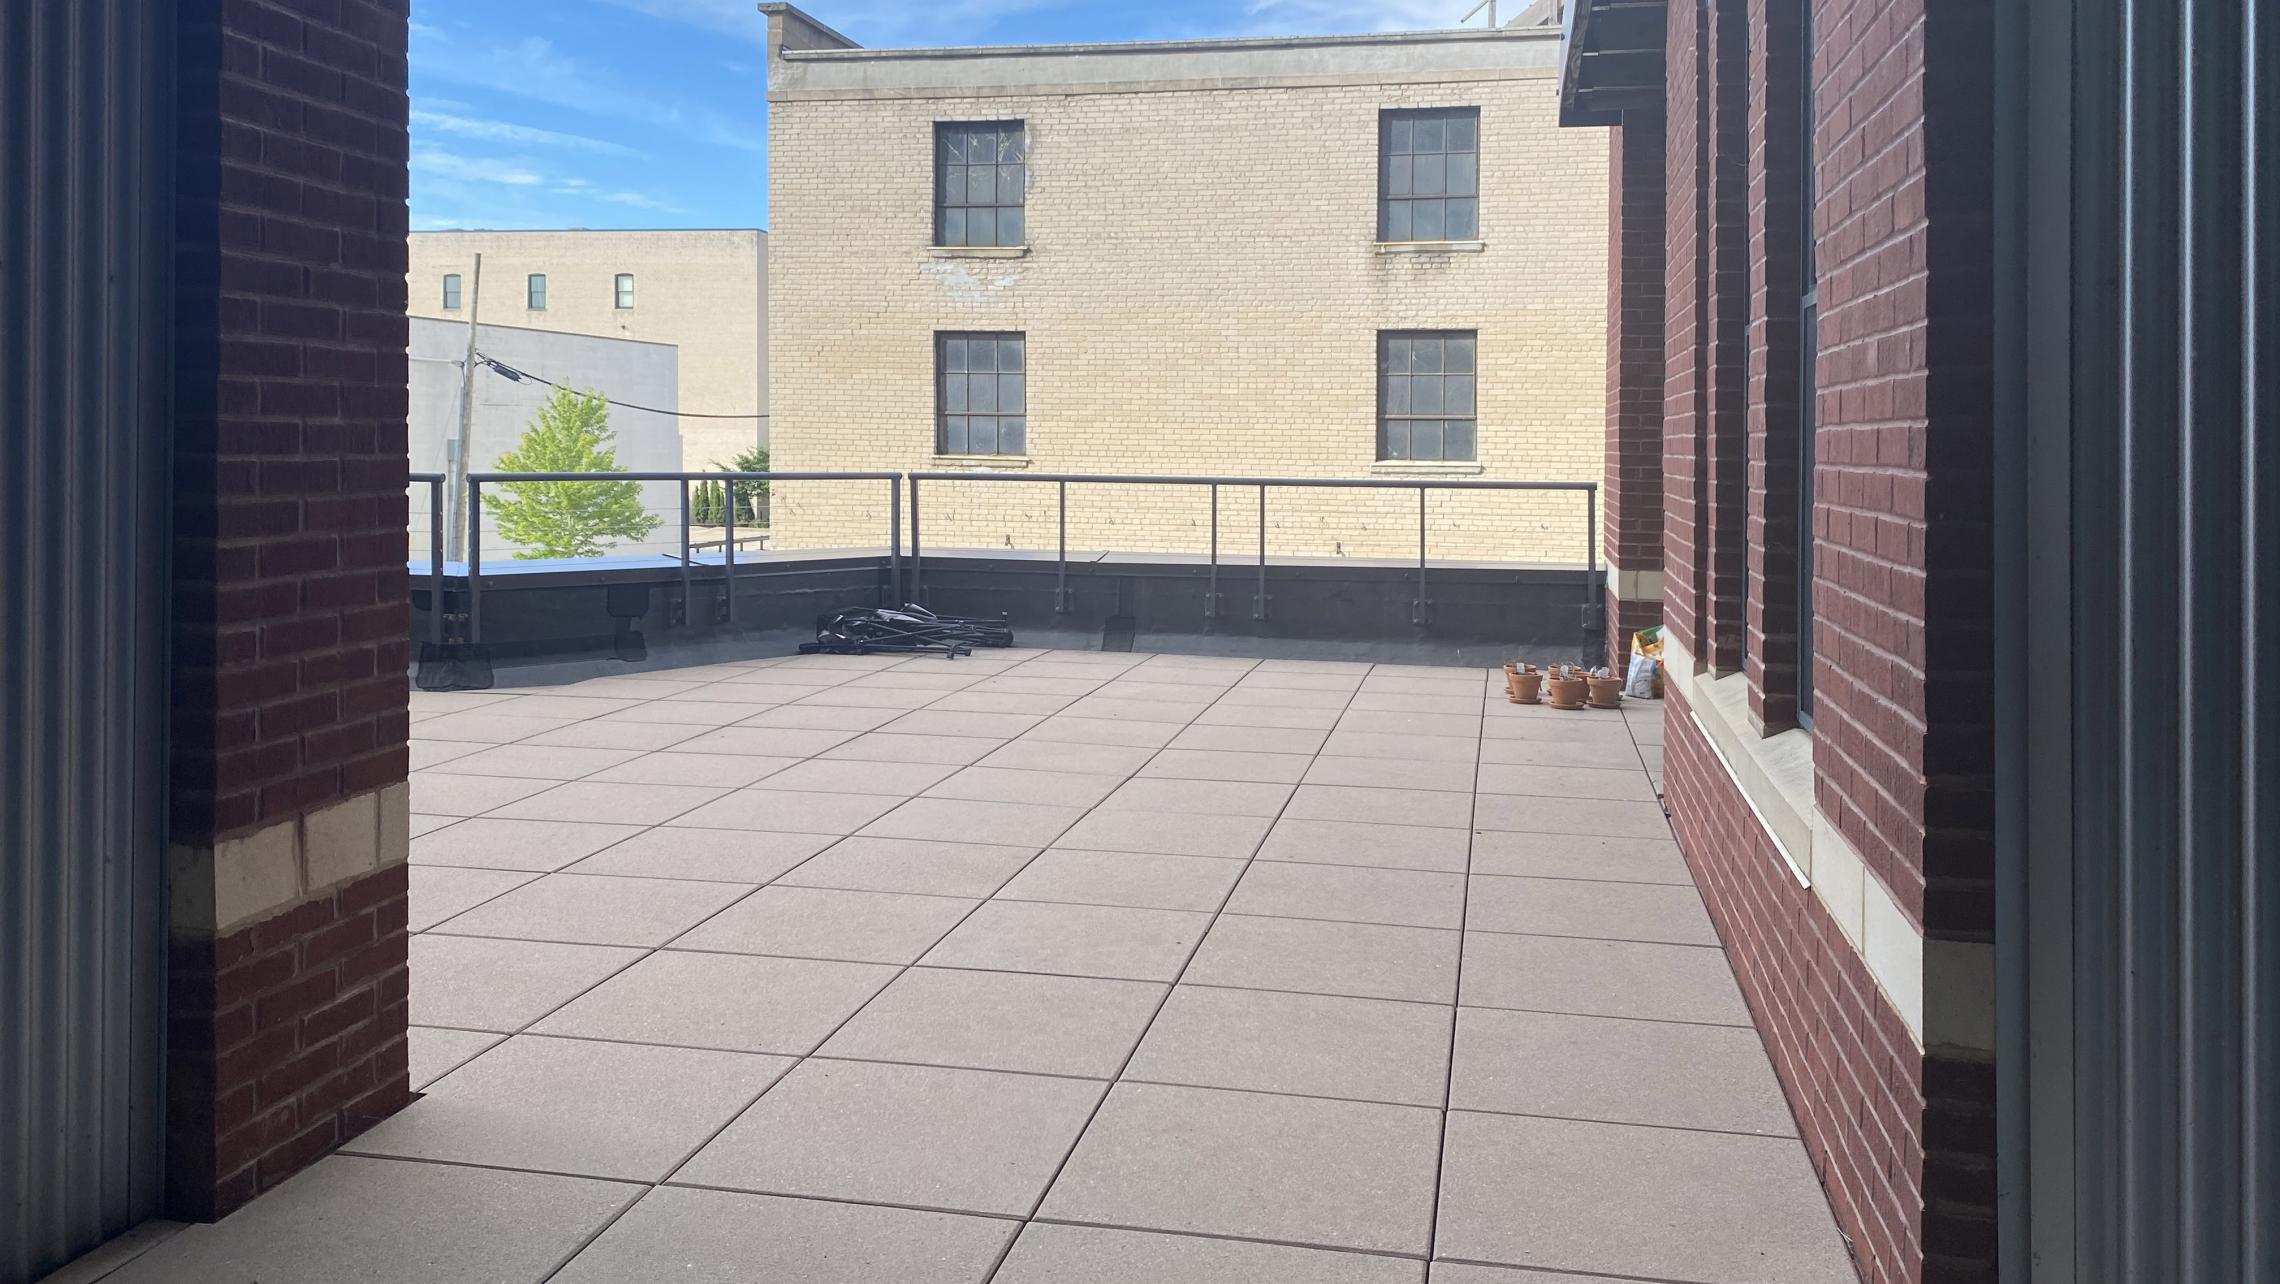 The-Depot-Apartment-1-210-Two-Bedroom-Kitchen-Living-Bathroom-Bathtub-Rooftop-Terrace-Fitness-Downtown-Madison-Capitol-Bike-Trails-Cats-Lifestyle-City-Lake